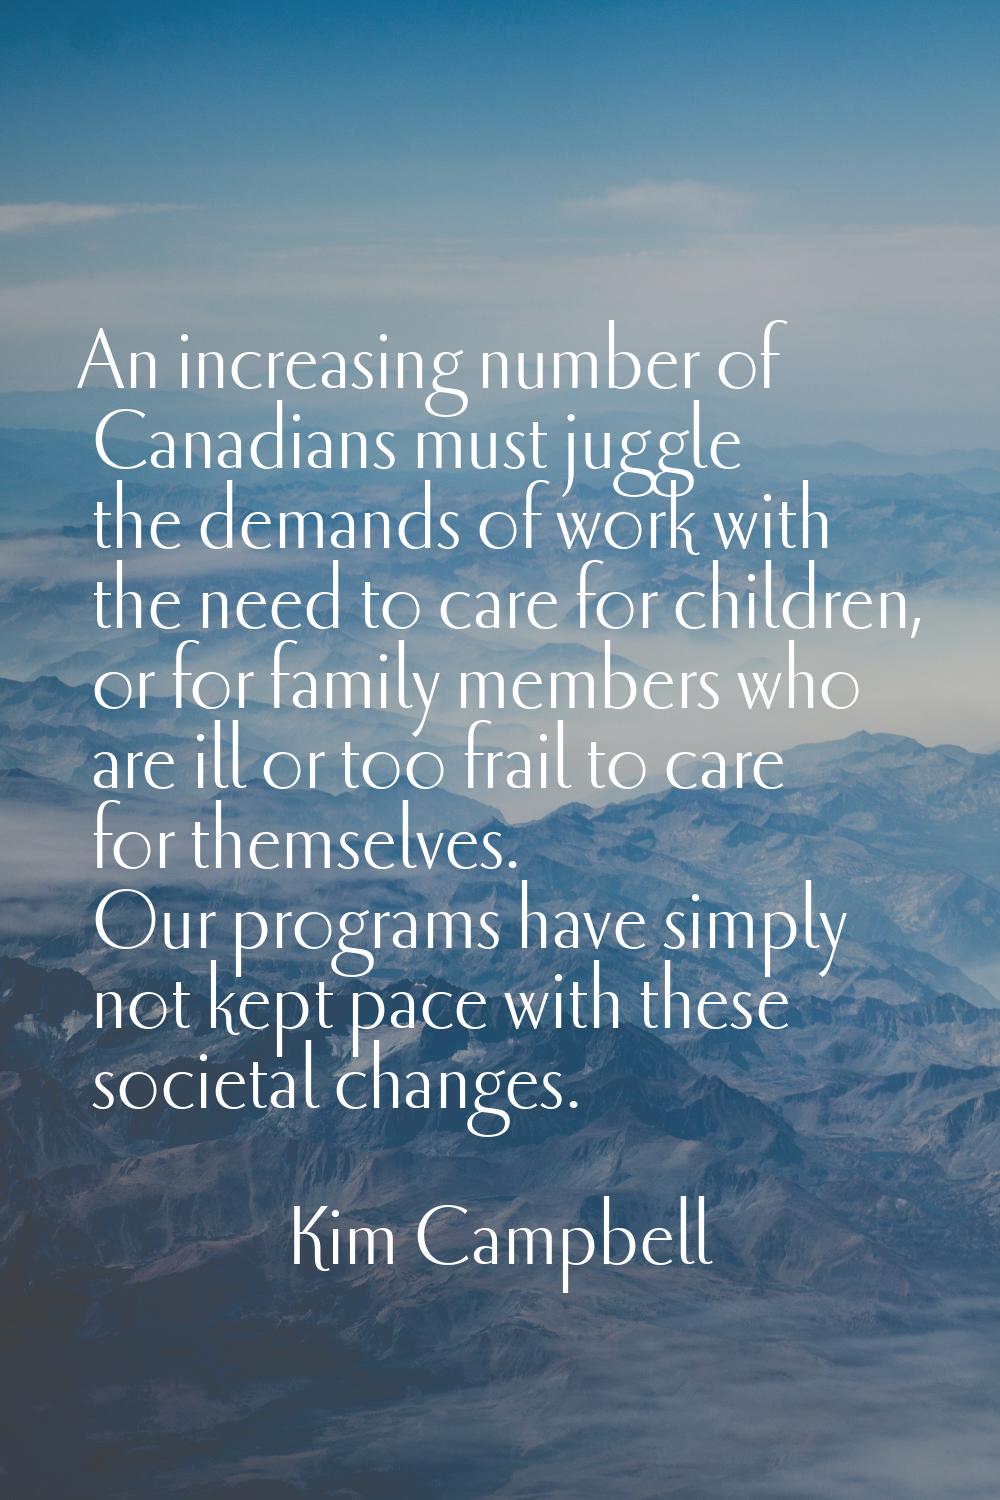 An increasing number of Canadians must juggle the demands of work with the need to care for childre